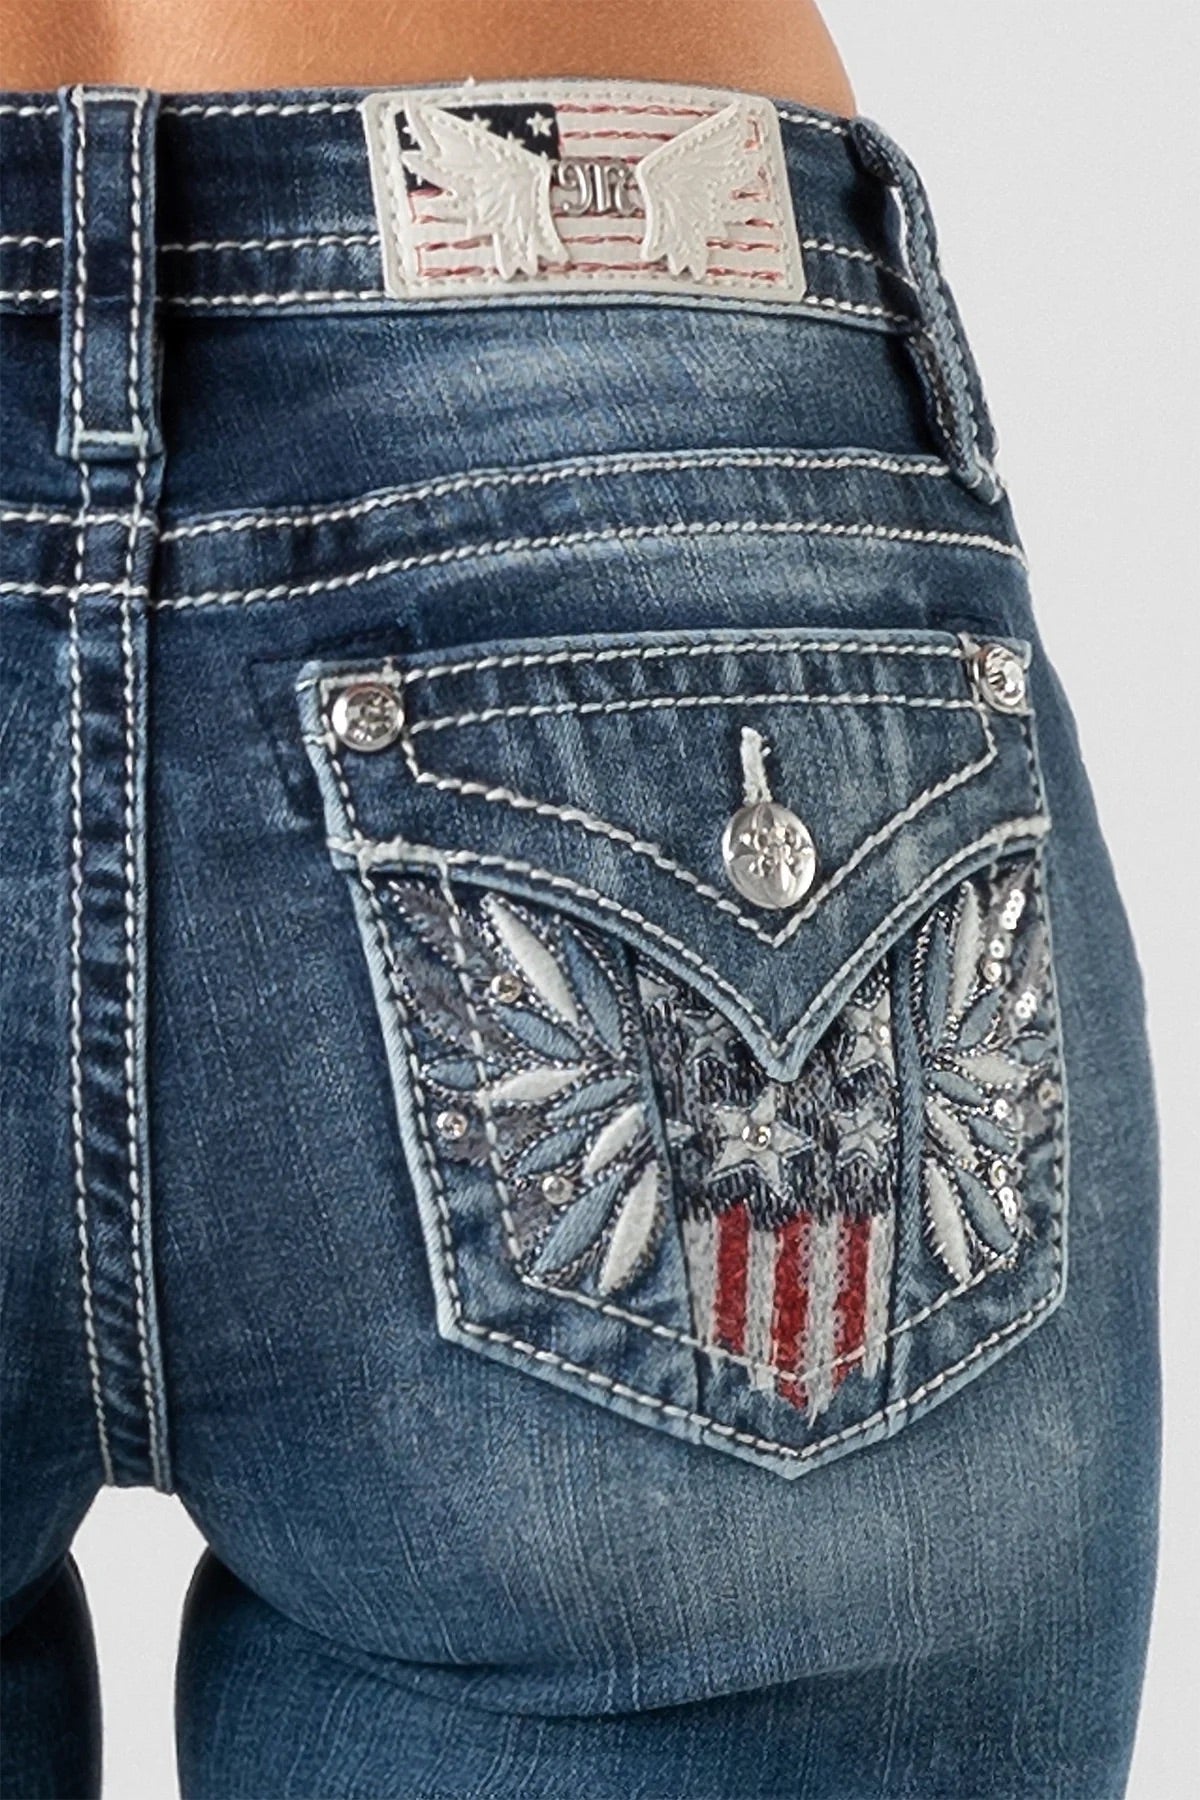 Miss Me Winged Independence Bootcut Jeans